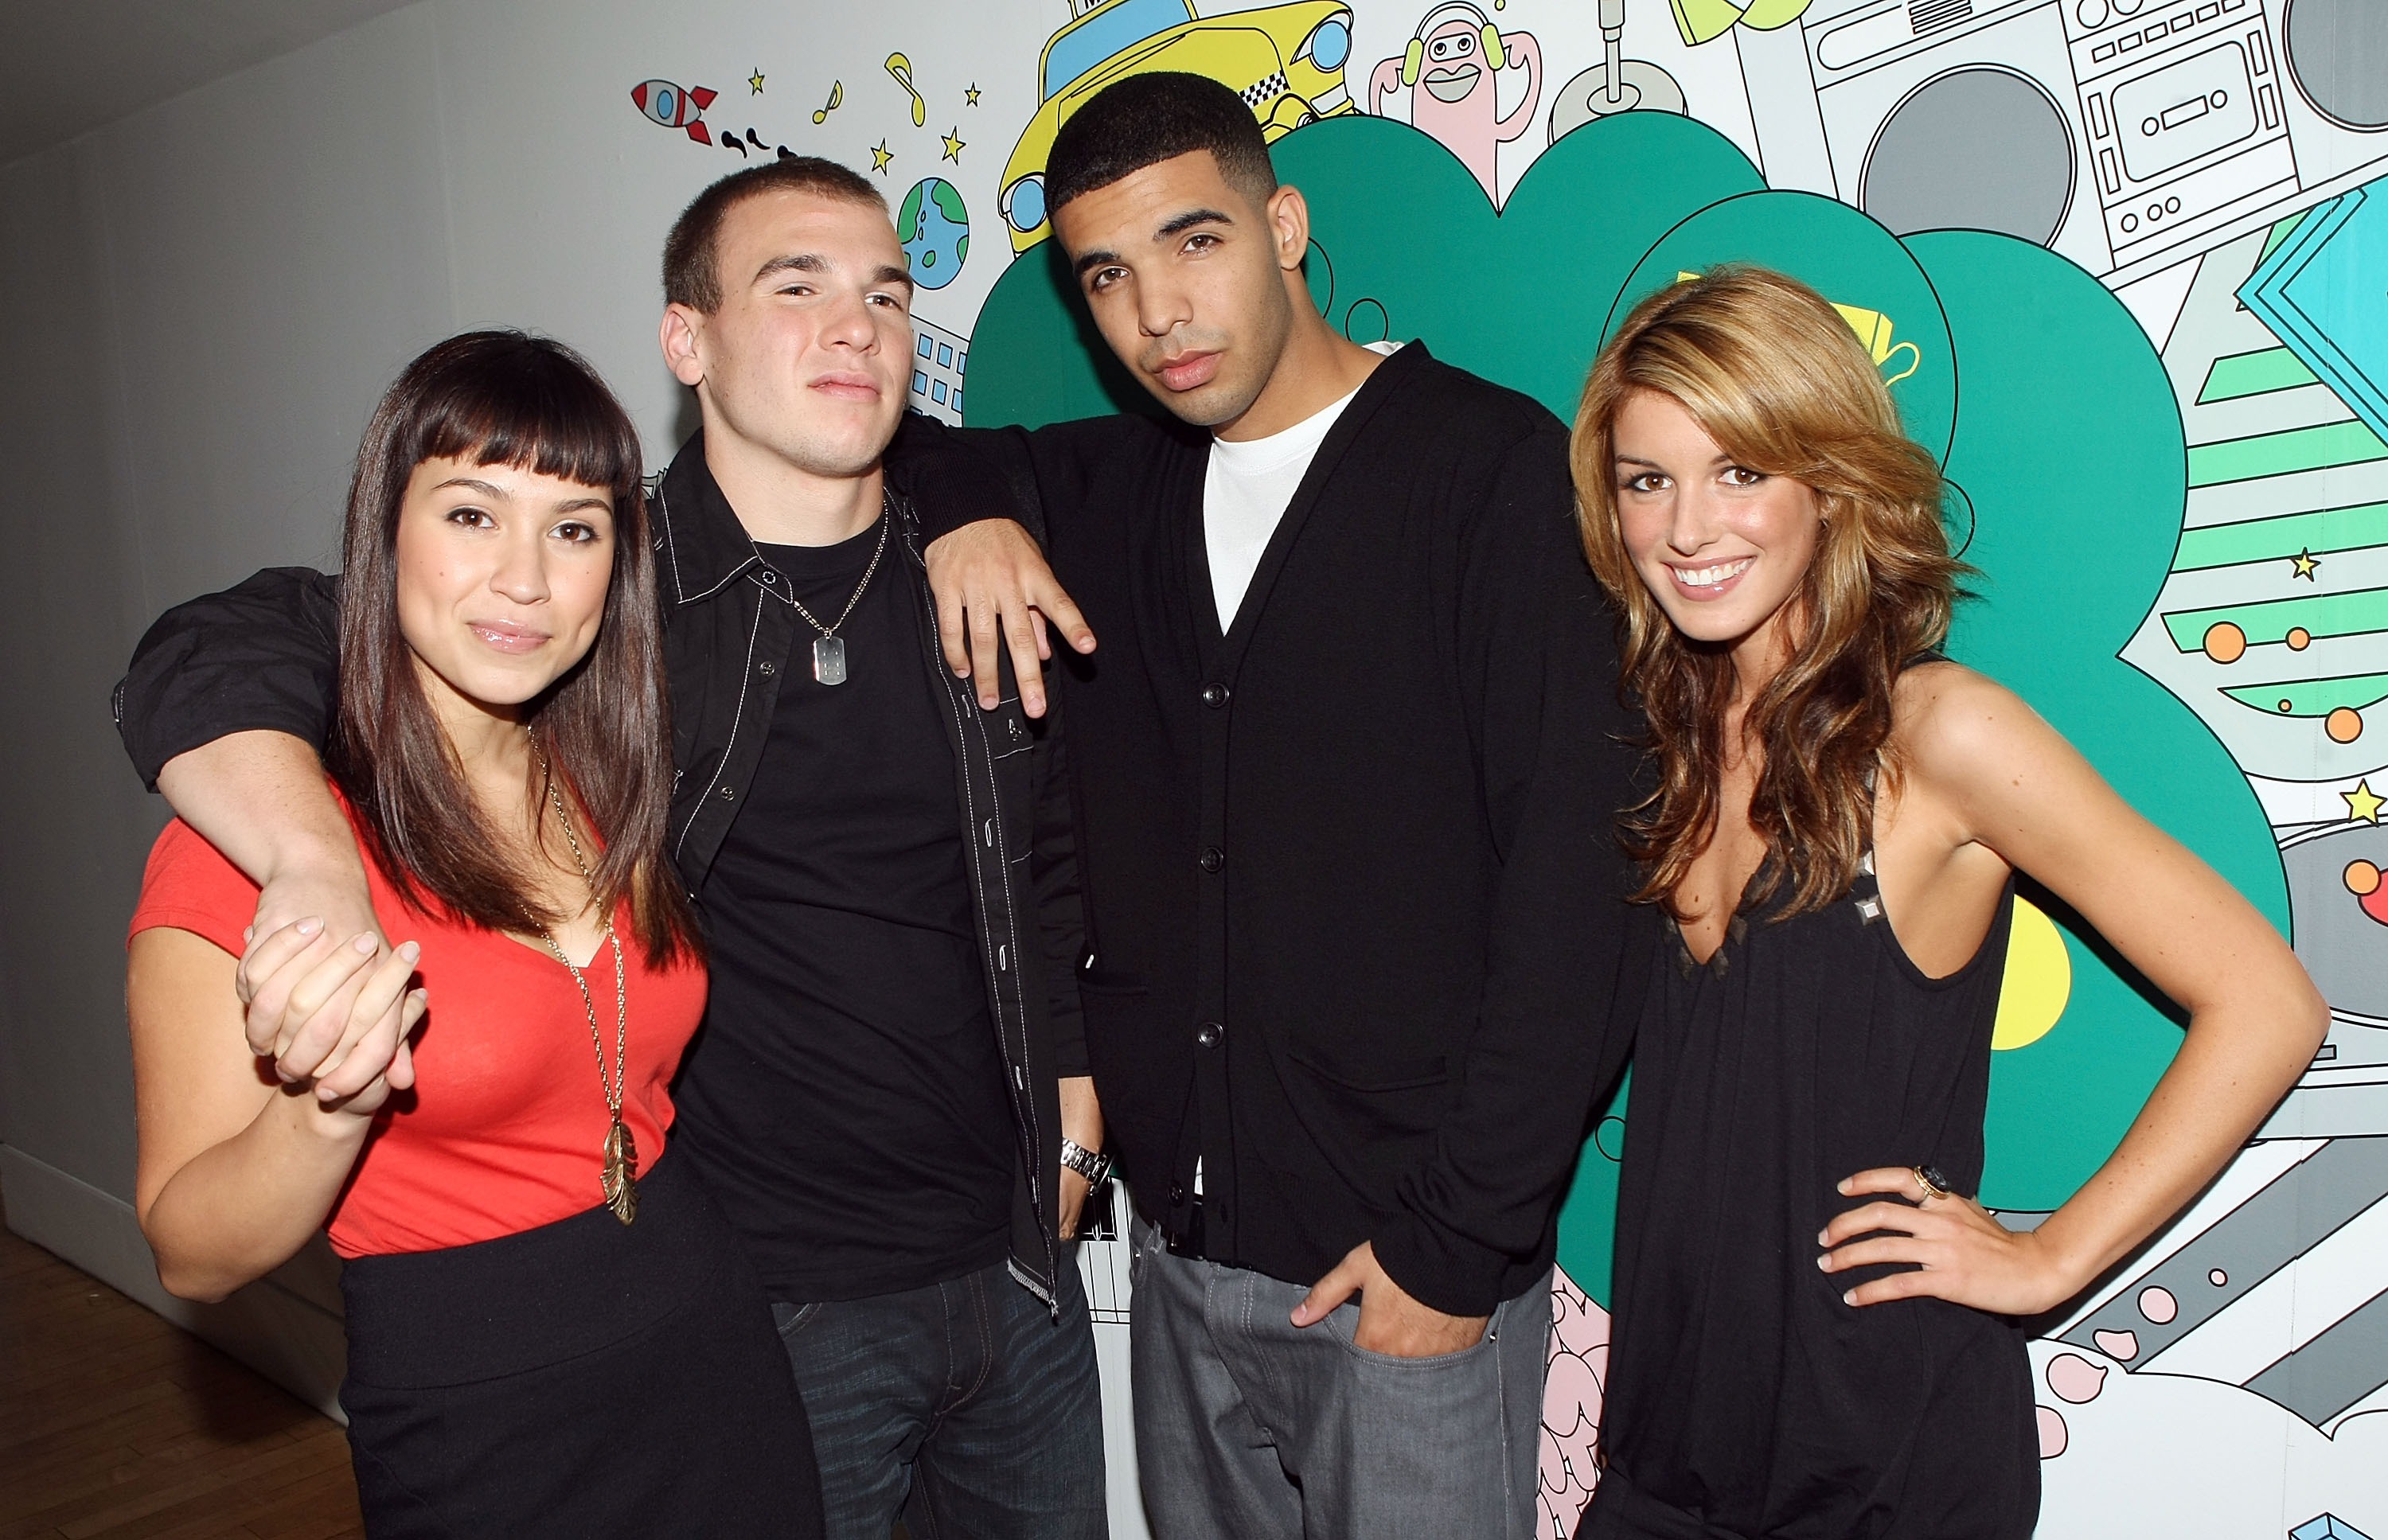 NEW YORK - OCTOBER 02: (U.S. TABS OUT) "DeGrassi High" cast members (L-R) Cassie Steele, Shane Kippel, Aubrey Graham, and Shenae Grimes pose for a photo backstage during MTV's Total Request Live at the MTV Times Square Studios on October 2, 2007 in New York City.